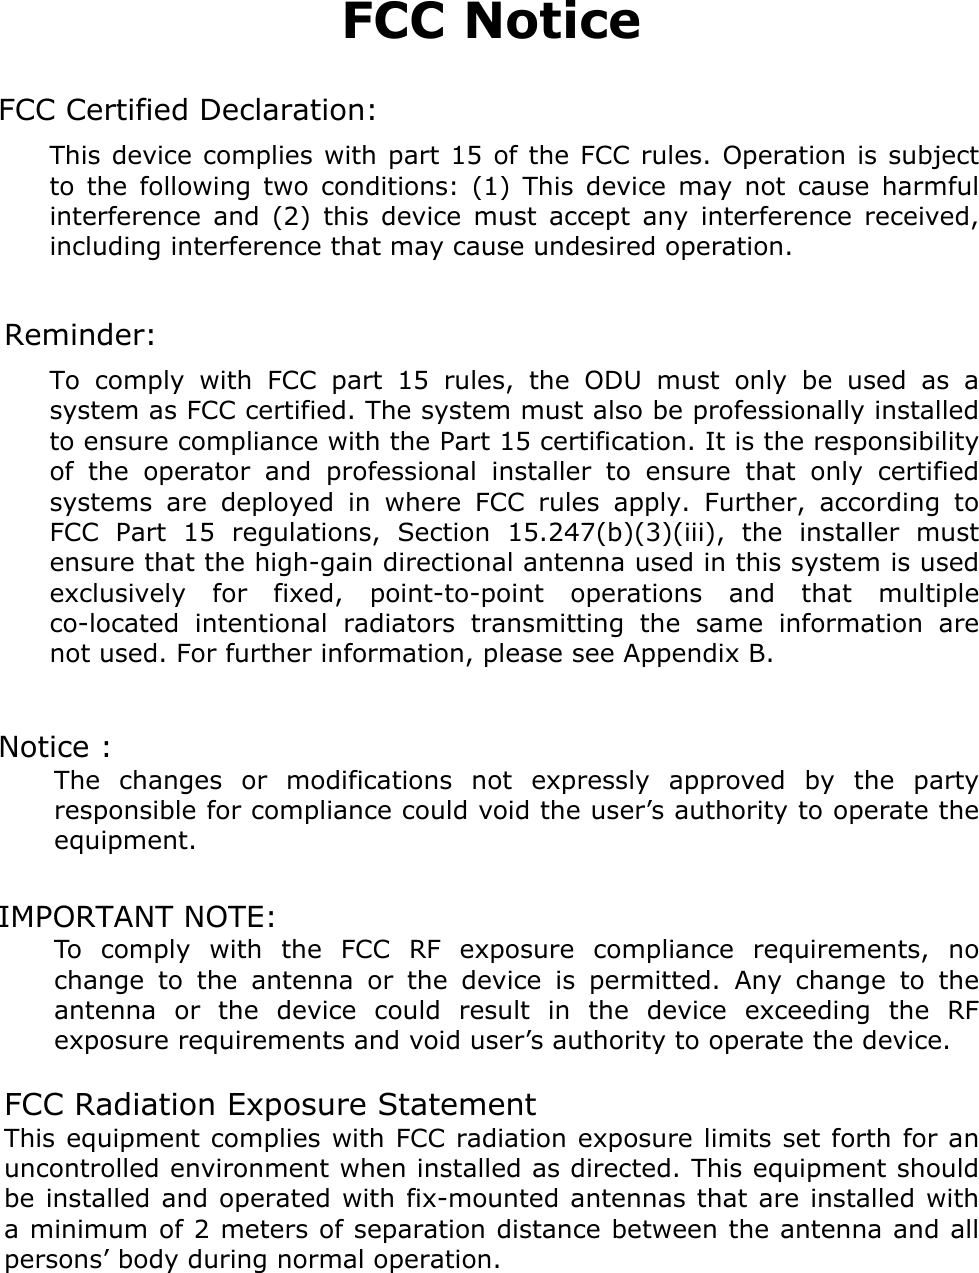 FCC Notice  FCC Certified Declaration: This device complies with part 15 of the FCC rules. Operation is subject to the following two conditions: (1) This device may not cause harmful interference and (2) this device must accept any interference received, including interference that may cause undesired operation.  Reminder: To comply with FCC part 15 rules, the ODU must only be used as a system as FCC certified. The system must also be professionally installed to ensure compliance with the Part 15 certification. It is the responsibility of the operator and professional installer to ensure that only certified systems are deployed in where FCC rules apply. Further, according to FCC Part 15 regulations, Section 15.247(b)(3)(iii), the installer must ensure that the high-gain directional antenna used in this system is used exclusively for fixed, point-to-point operations and that multiple co-located intentional radiators transmitting the same information are not used. For further information, please see Appendix B.  Notice :   The changes or modifications not expressly approved by the party responsible for compliance could void the user’s authority to operate the equipment.  IMPORTANT NOTE:   To comply with the FCC RF exposure compliance requirements, no change to the antenna or the device is permitted. Any change to the antenna or the device could result in the device exceeding the RF exposure requirements and void user’s authority to operate the device.  FCC Radiation Exposure Statement This equipment complies with FCC radiation exposure limits set forth for an uncontrolled environment when installed as directed. This equipment should be installed and operated with fix-mounted antennas that are installed with a minimum of 2 meters of separation distance between the antenna and all persons’ body during normal operation.   